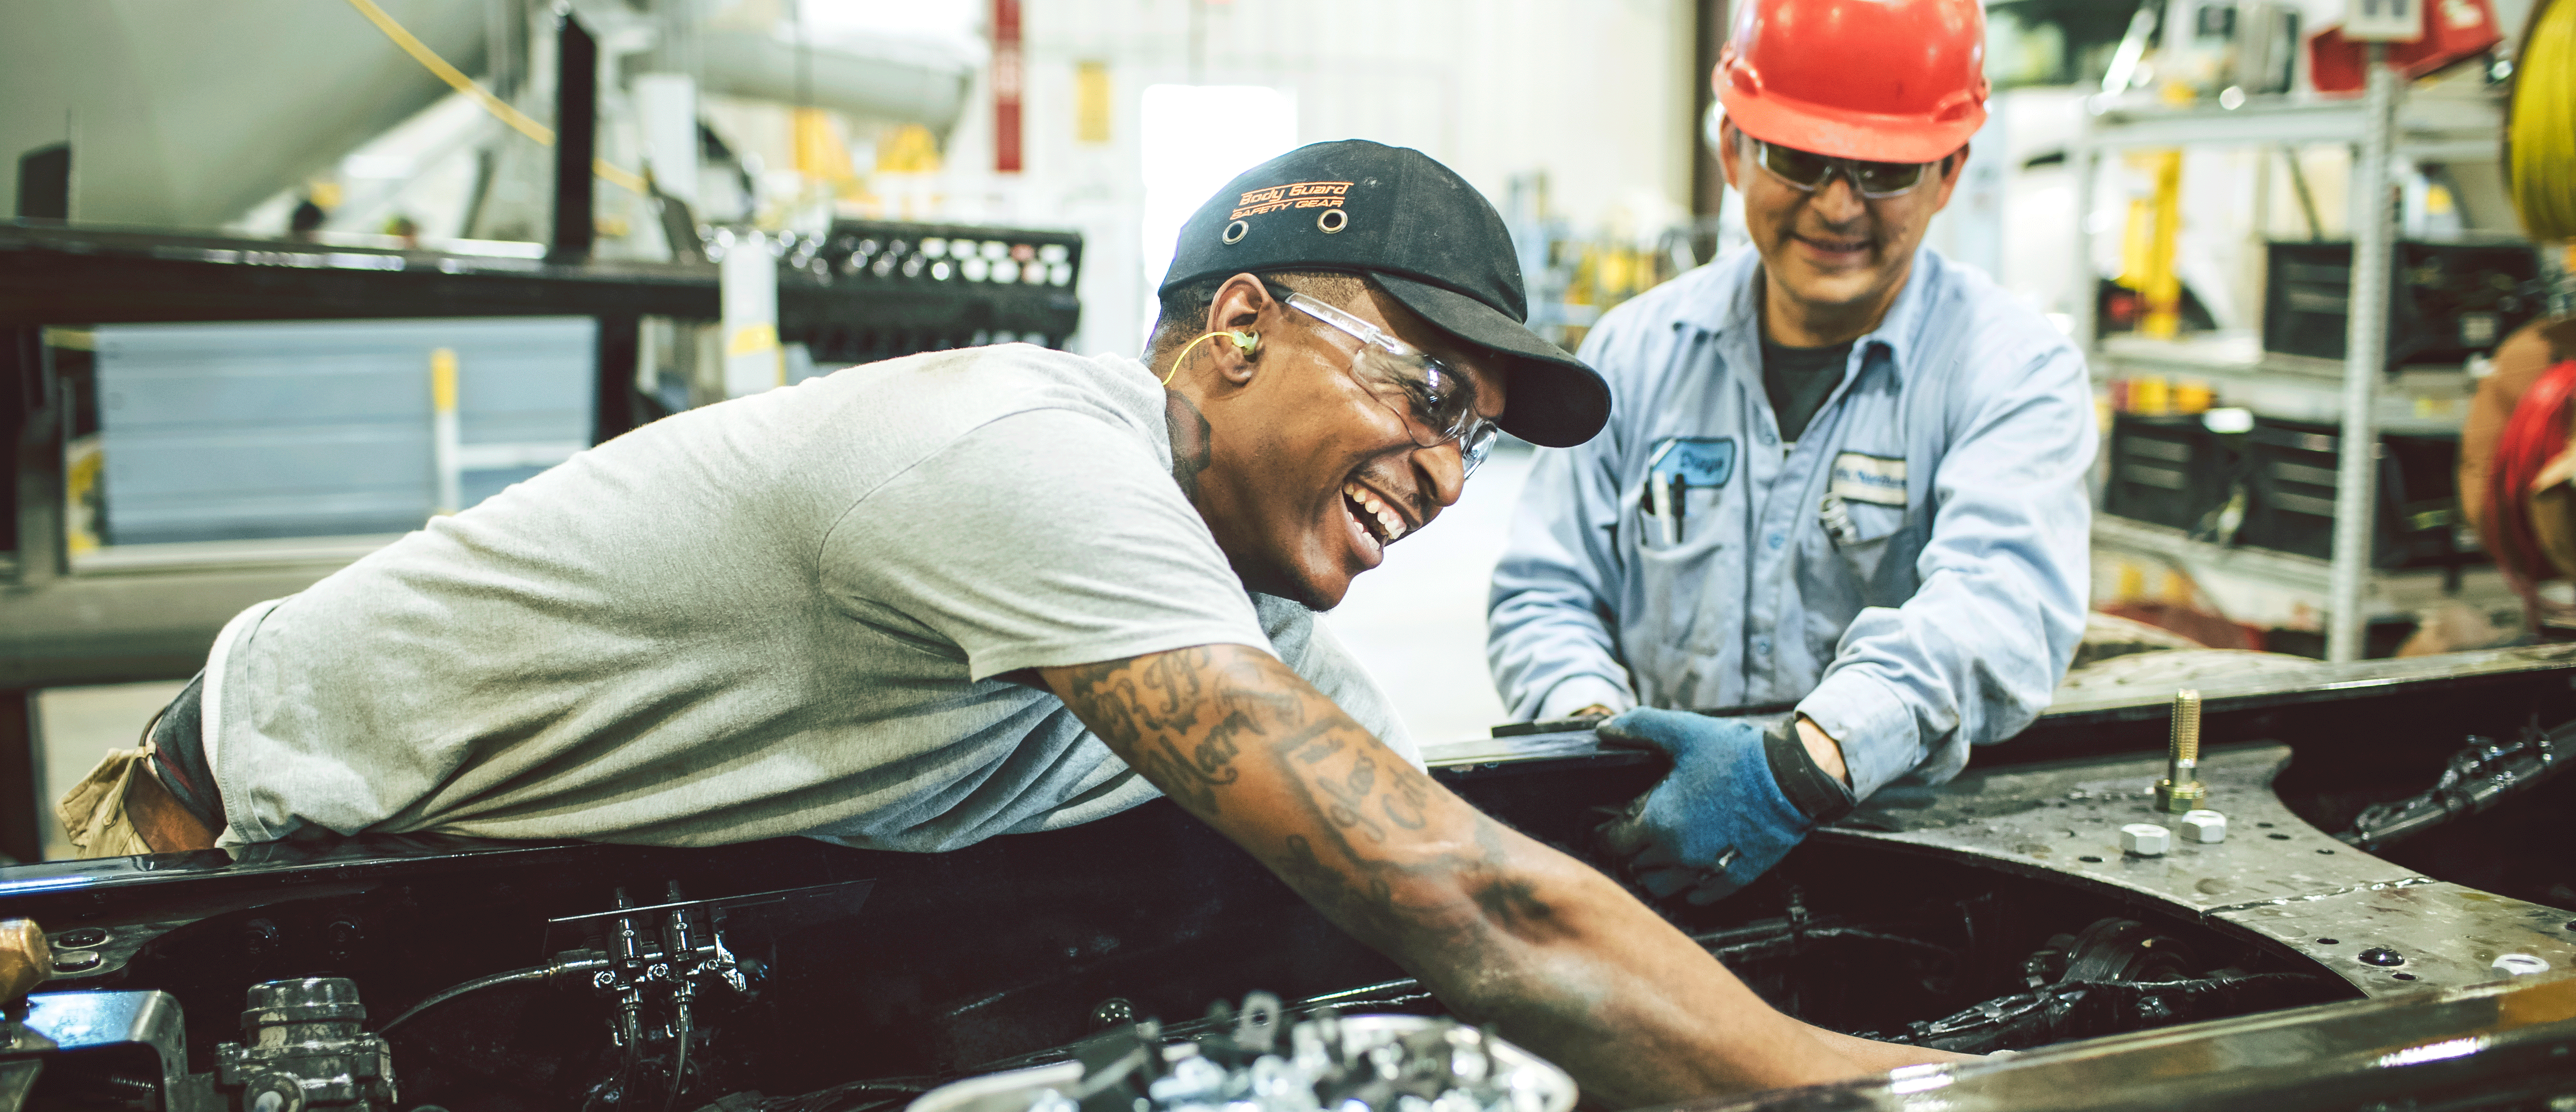 Two men wearing safety gear and smiling while working on an Oshkosh product in a manufacturing facility 